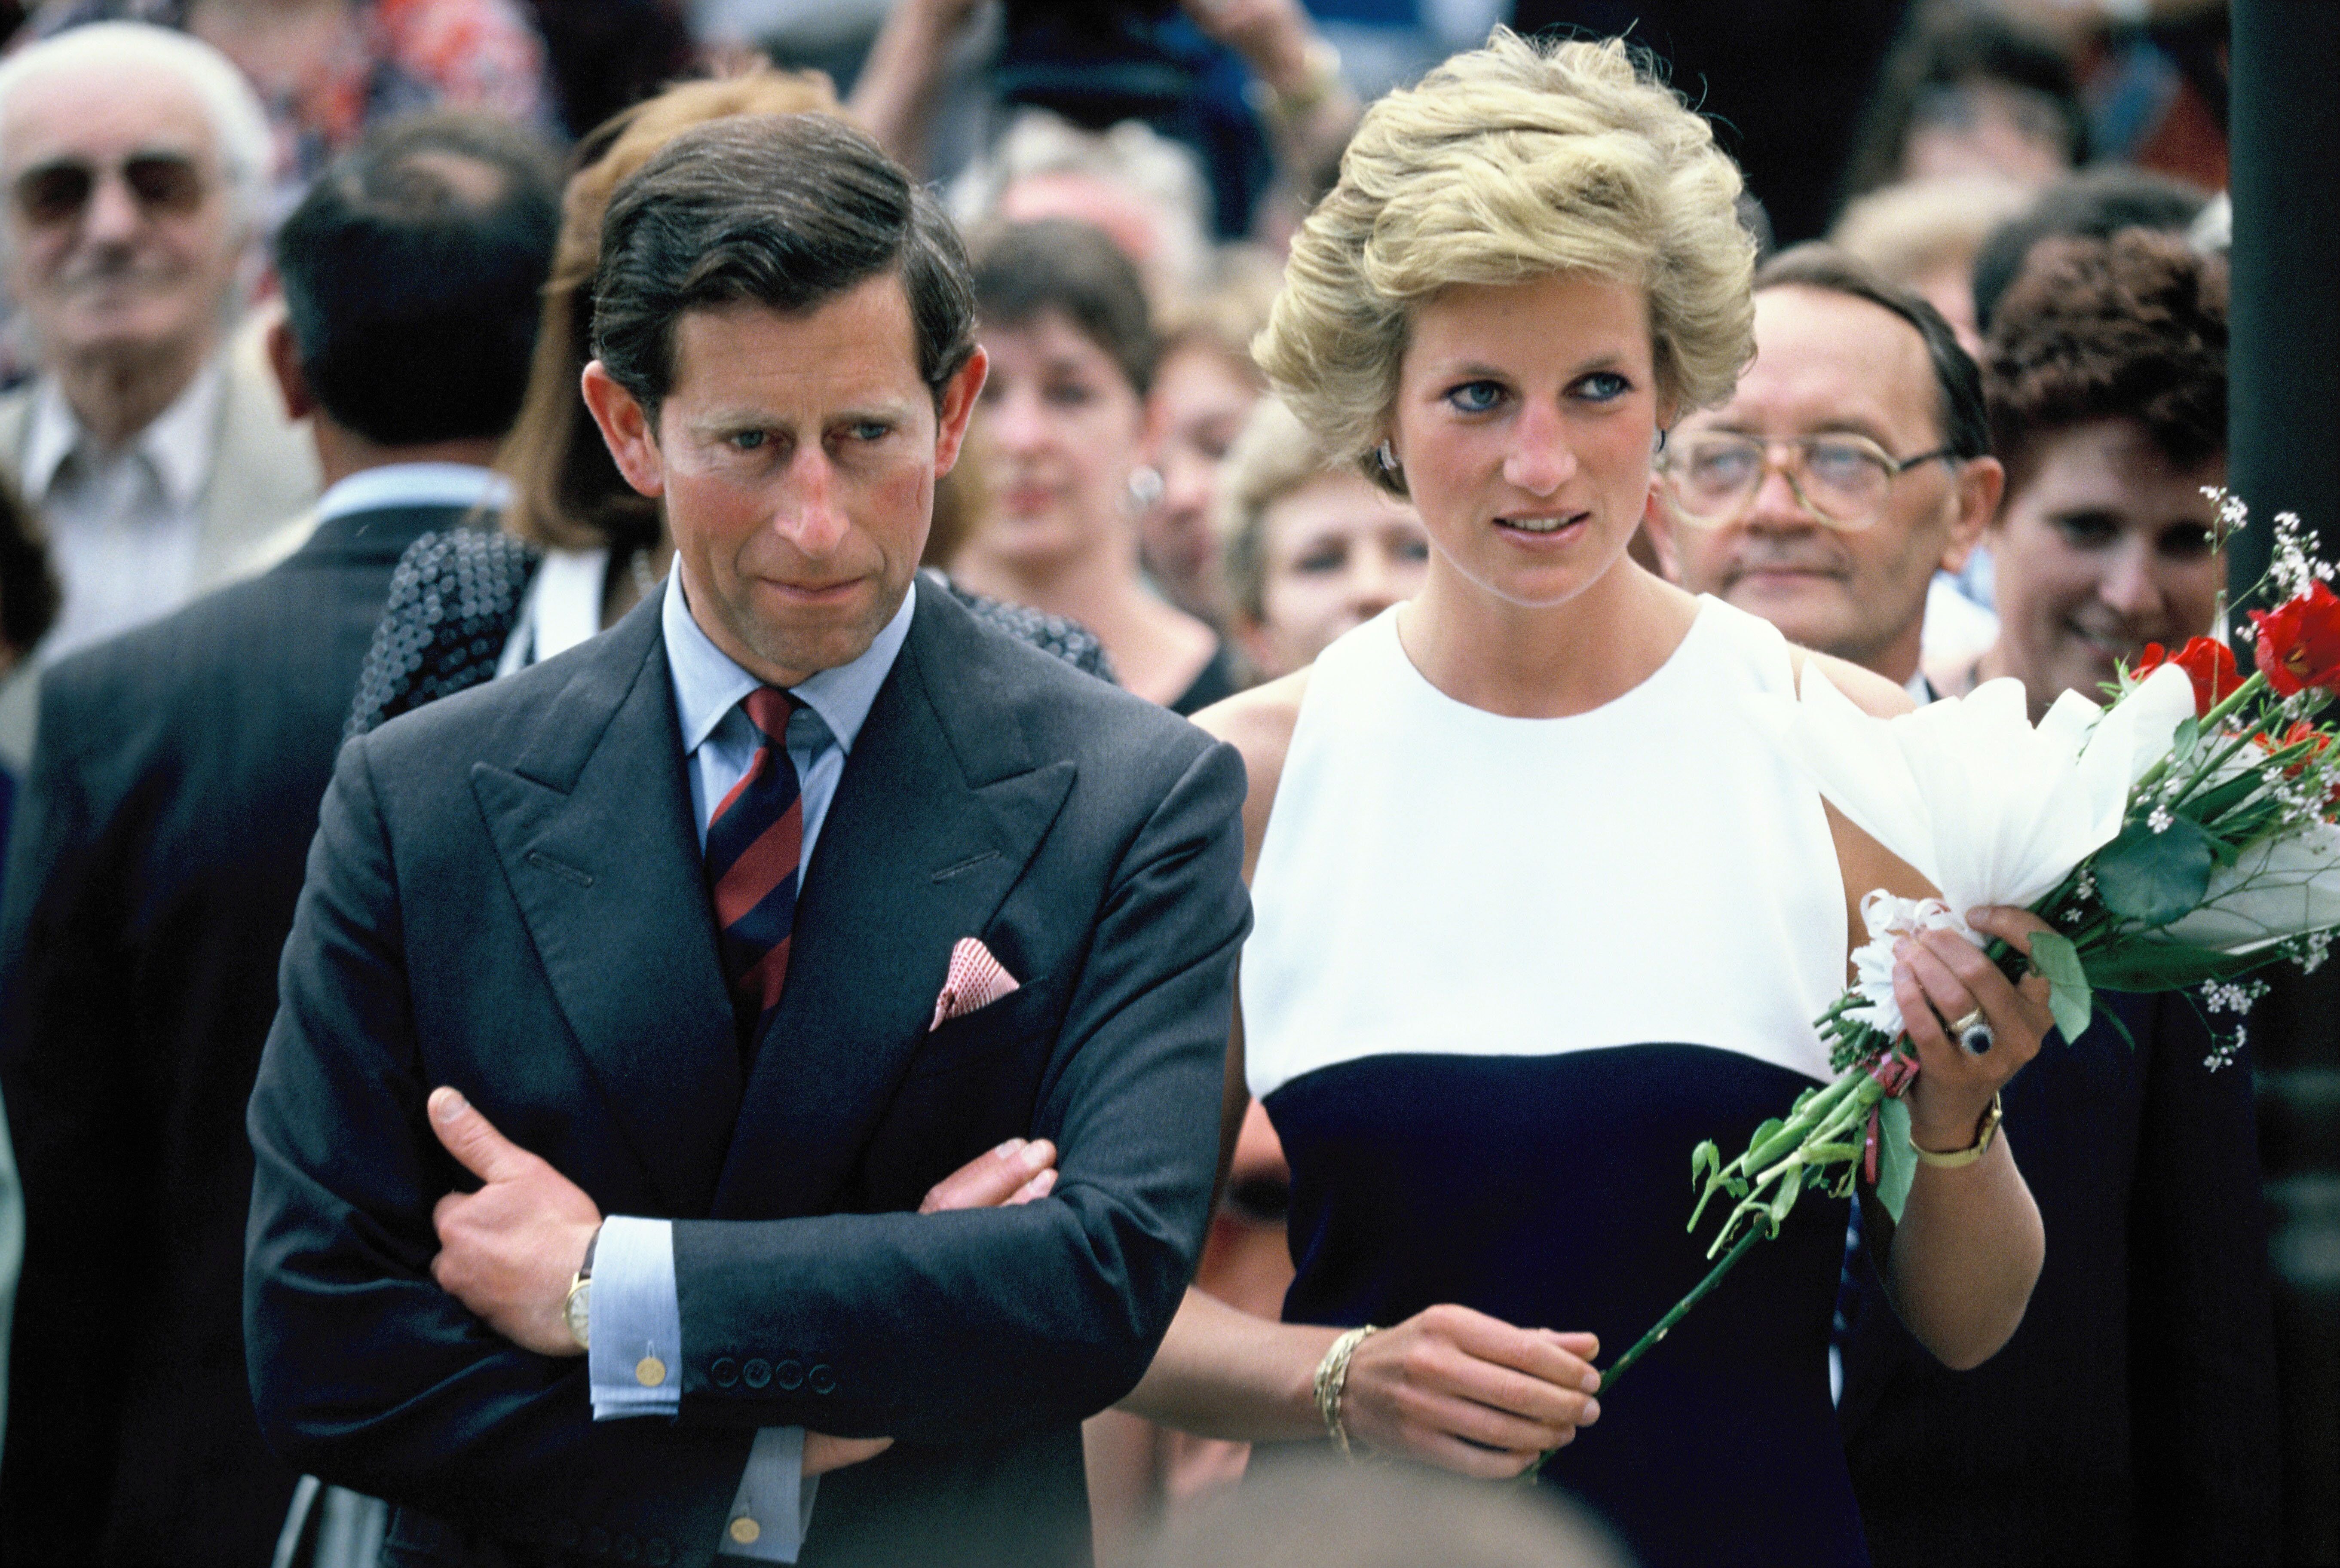 Prince Charles and Princess Diana in Hungary. | Source: Getty Images